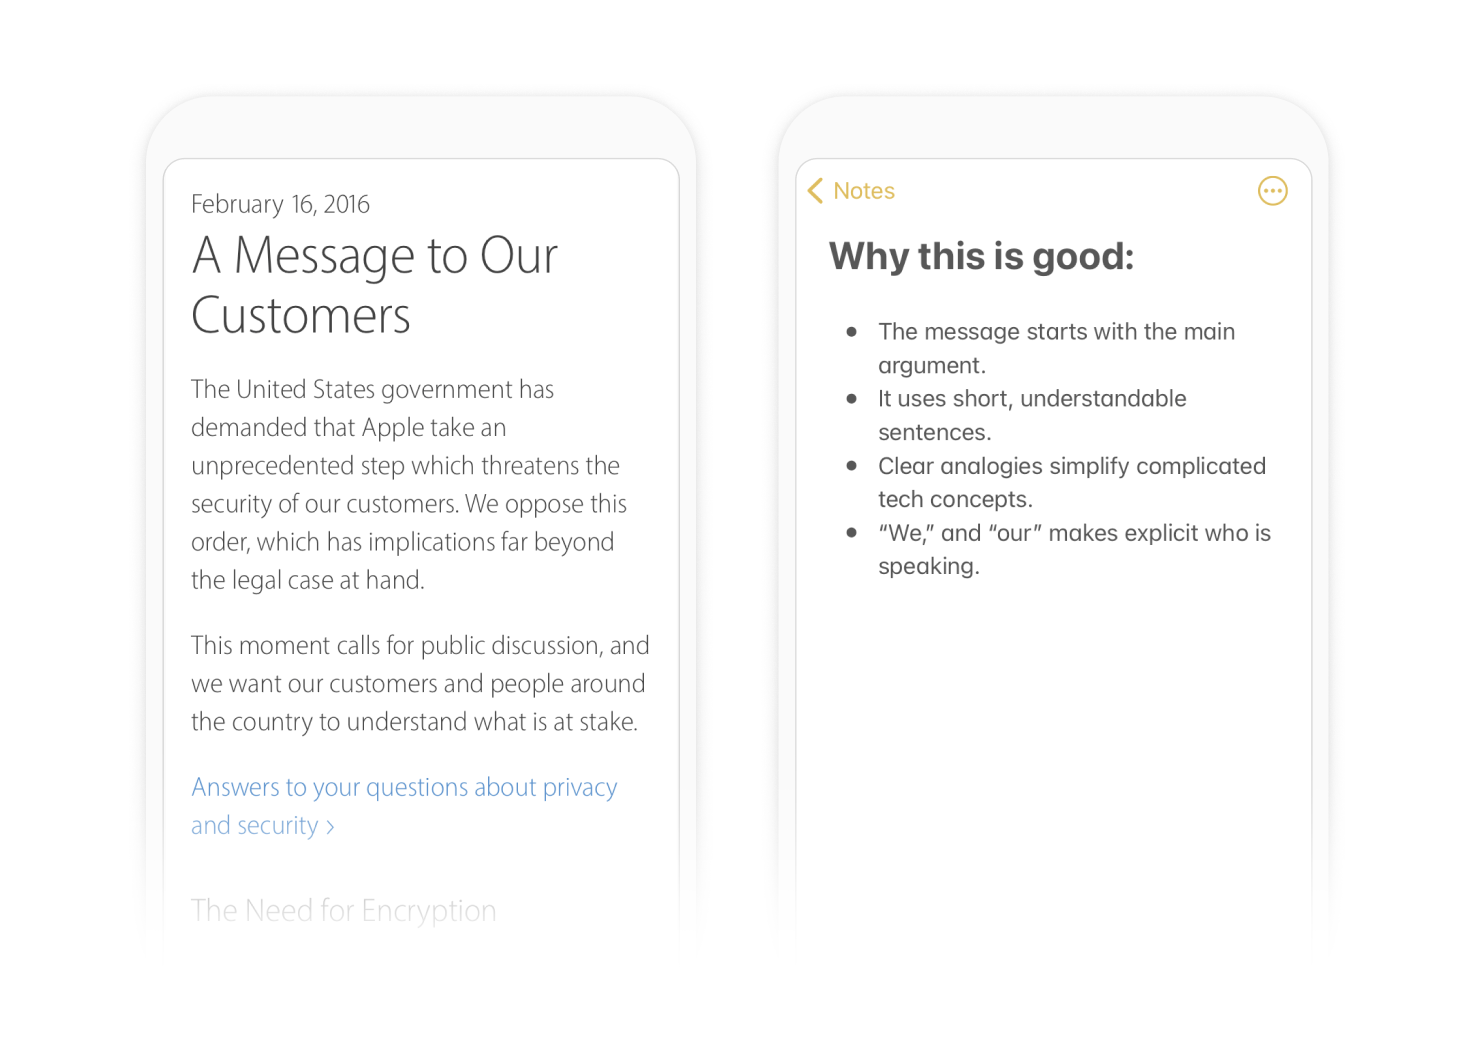 A screenshot from Apple's message on privacy is shown. It is clearly titled: A message to our customers. The annotation reads: Why this is good, with a bulleted list of reason: The message starts with the main argument. It uses short, understandable sentences. Clear analogies simplify complicated tech concepts. "We" and "our" makes explicit who is speaking. End description.